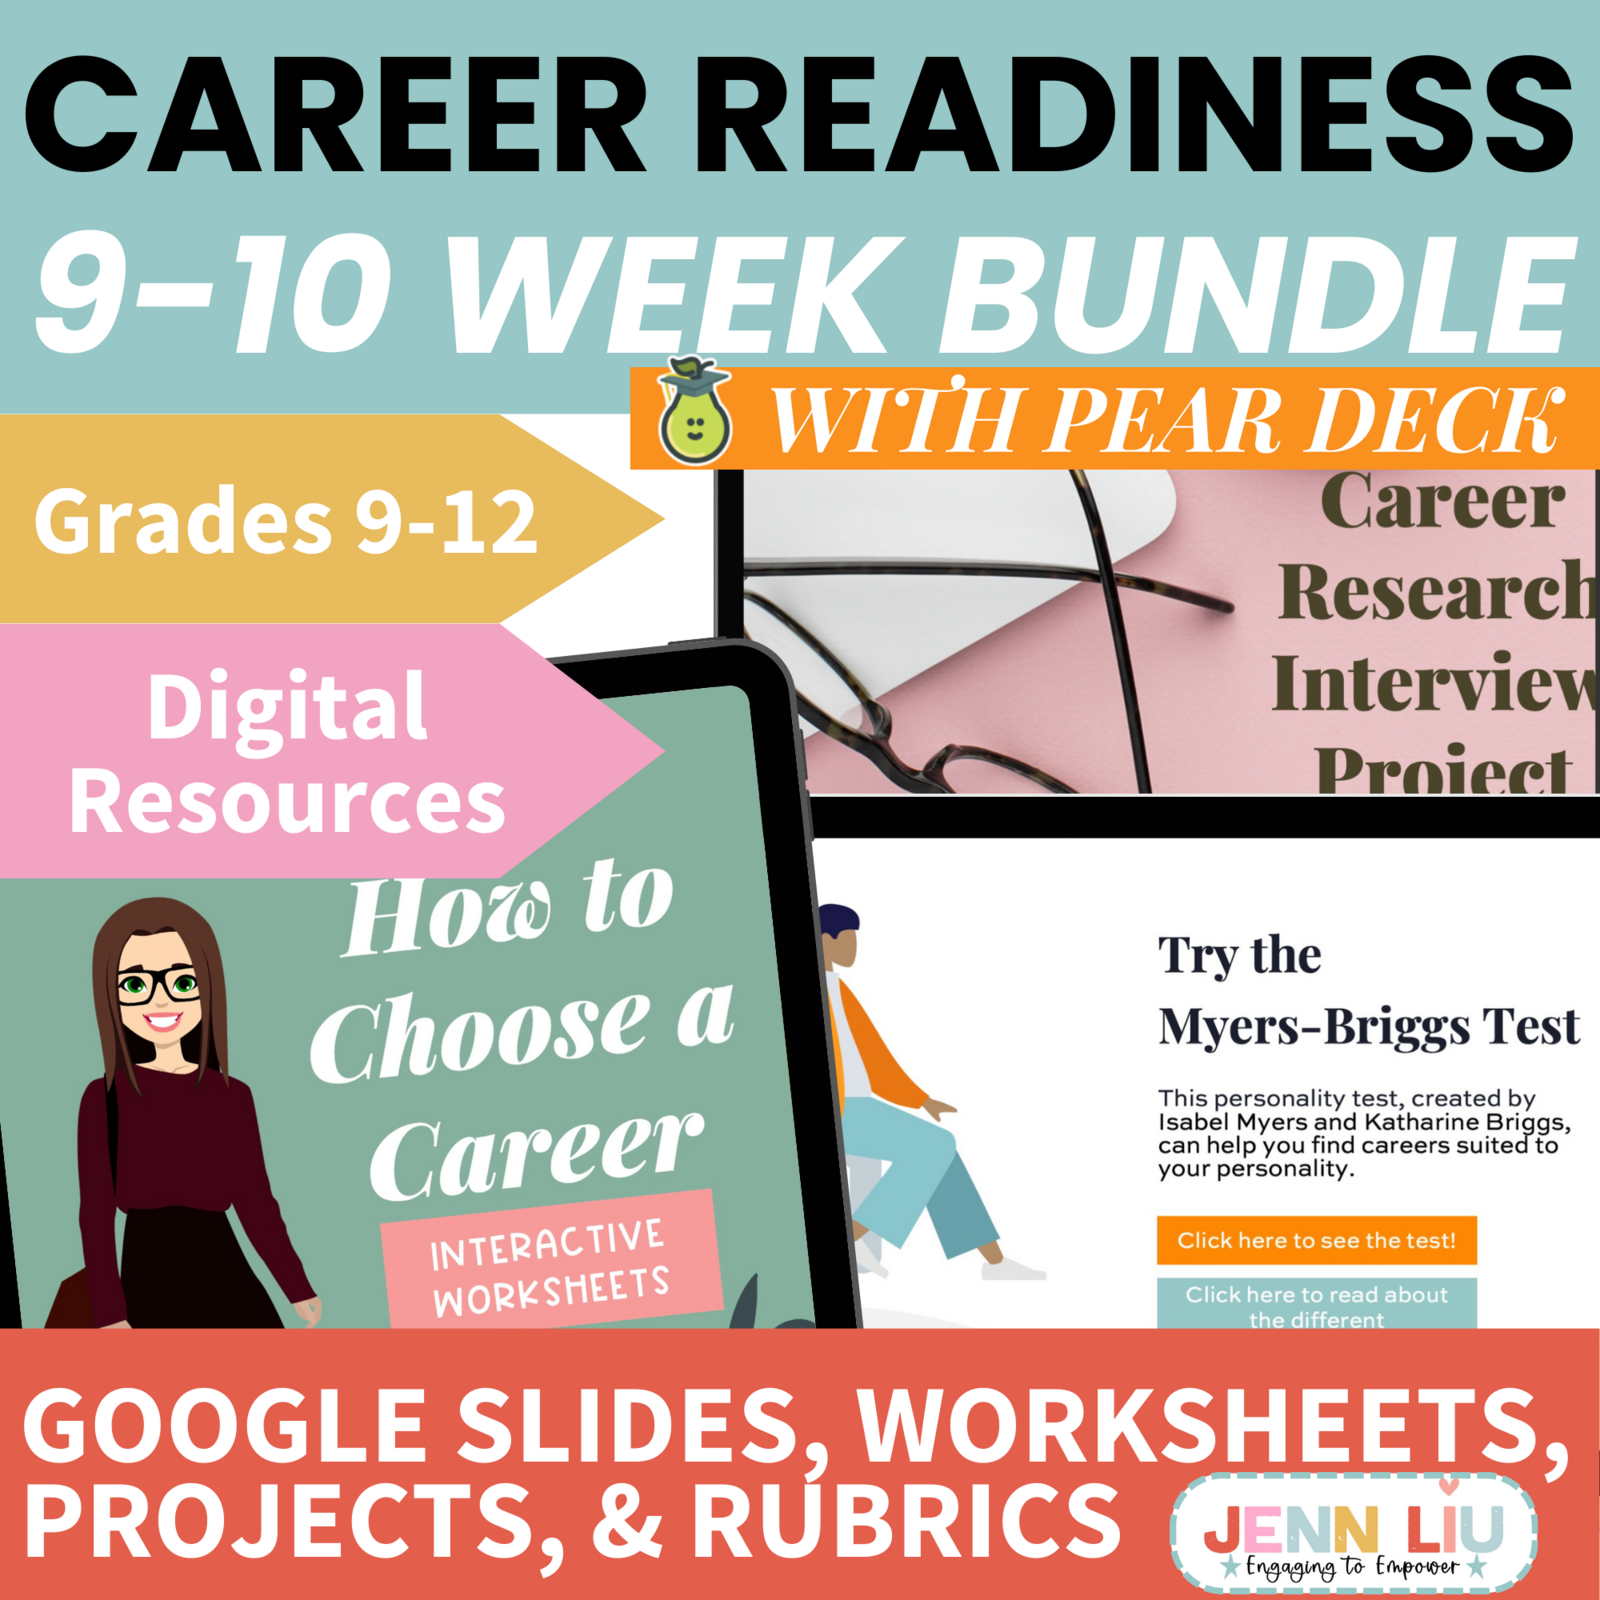 career-readiness-pear-deck